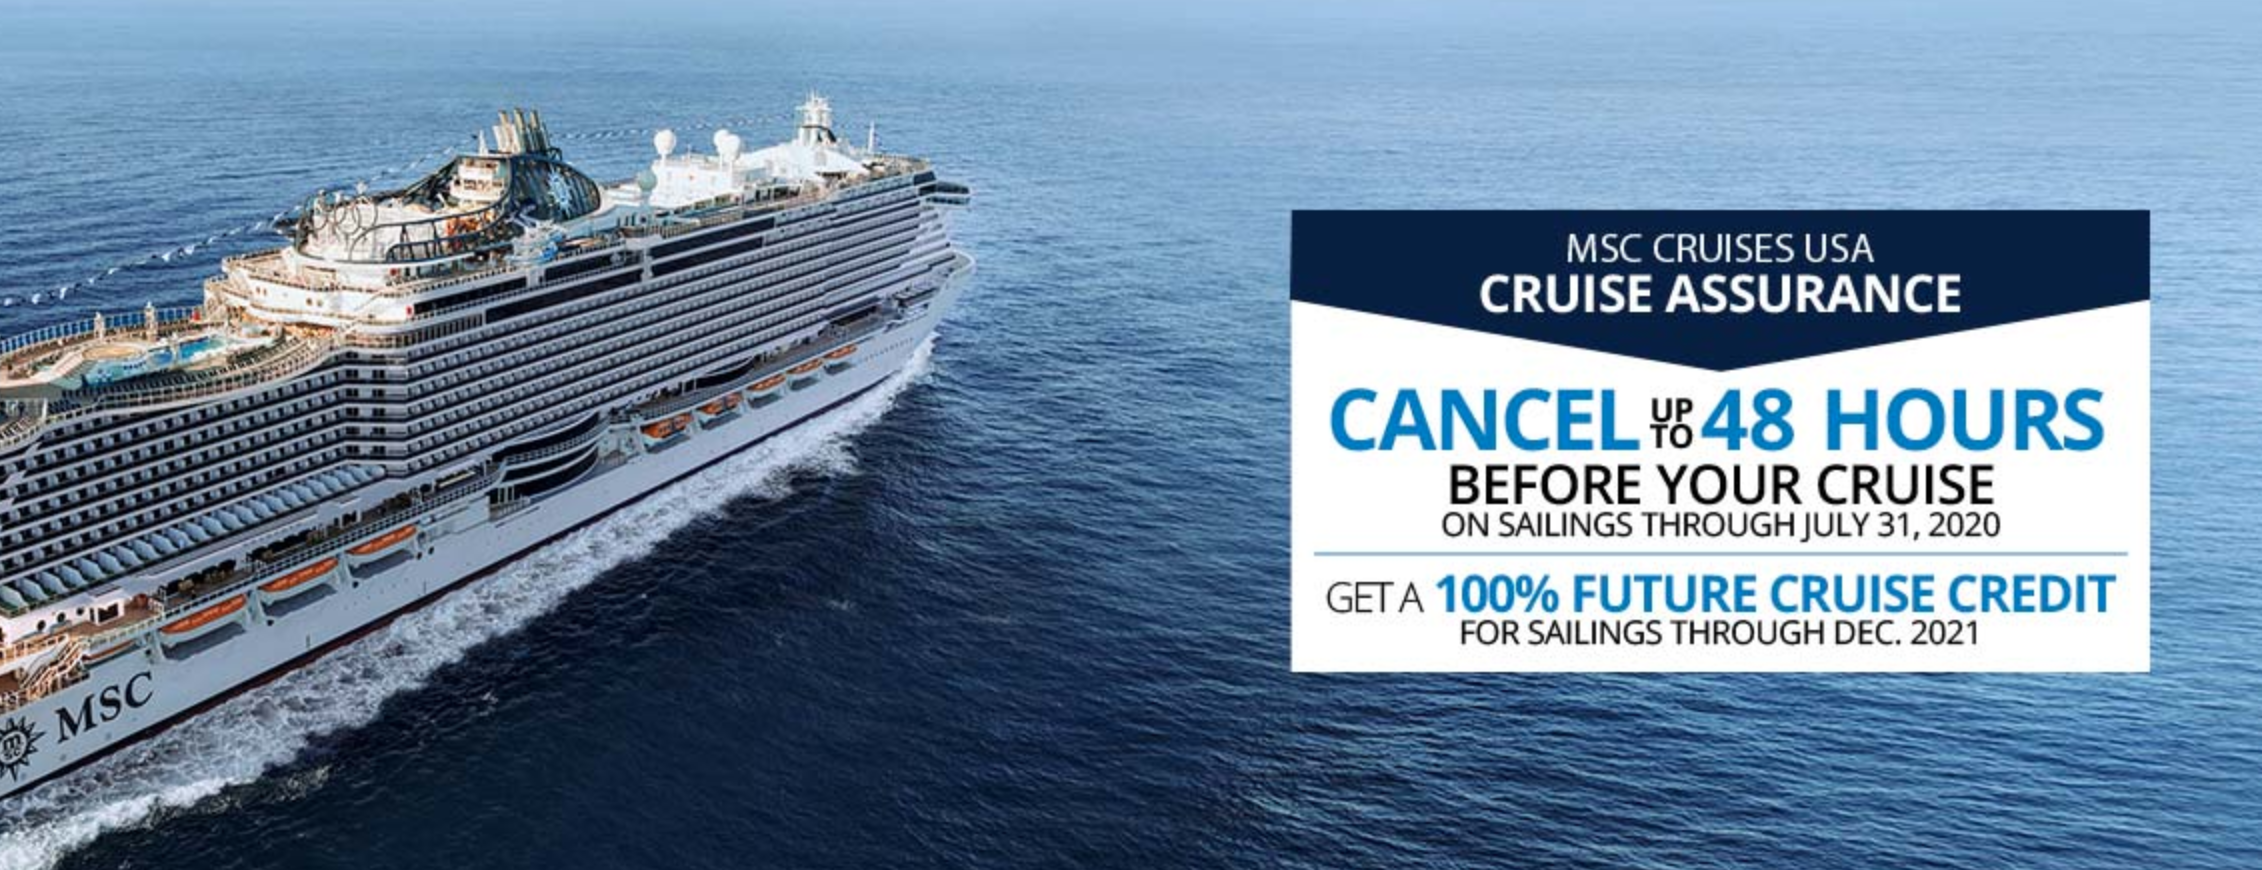 Cruise Cancellation Policies Due to COVID19 [Detailed Guide]